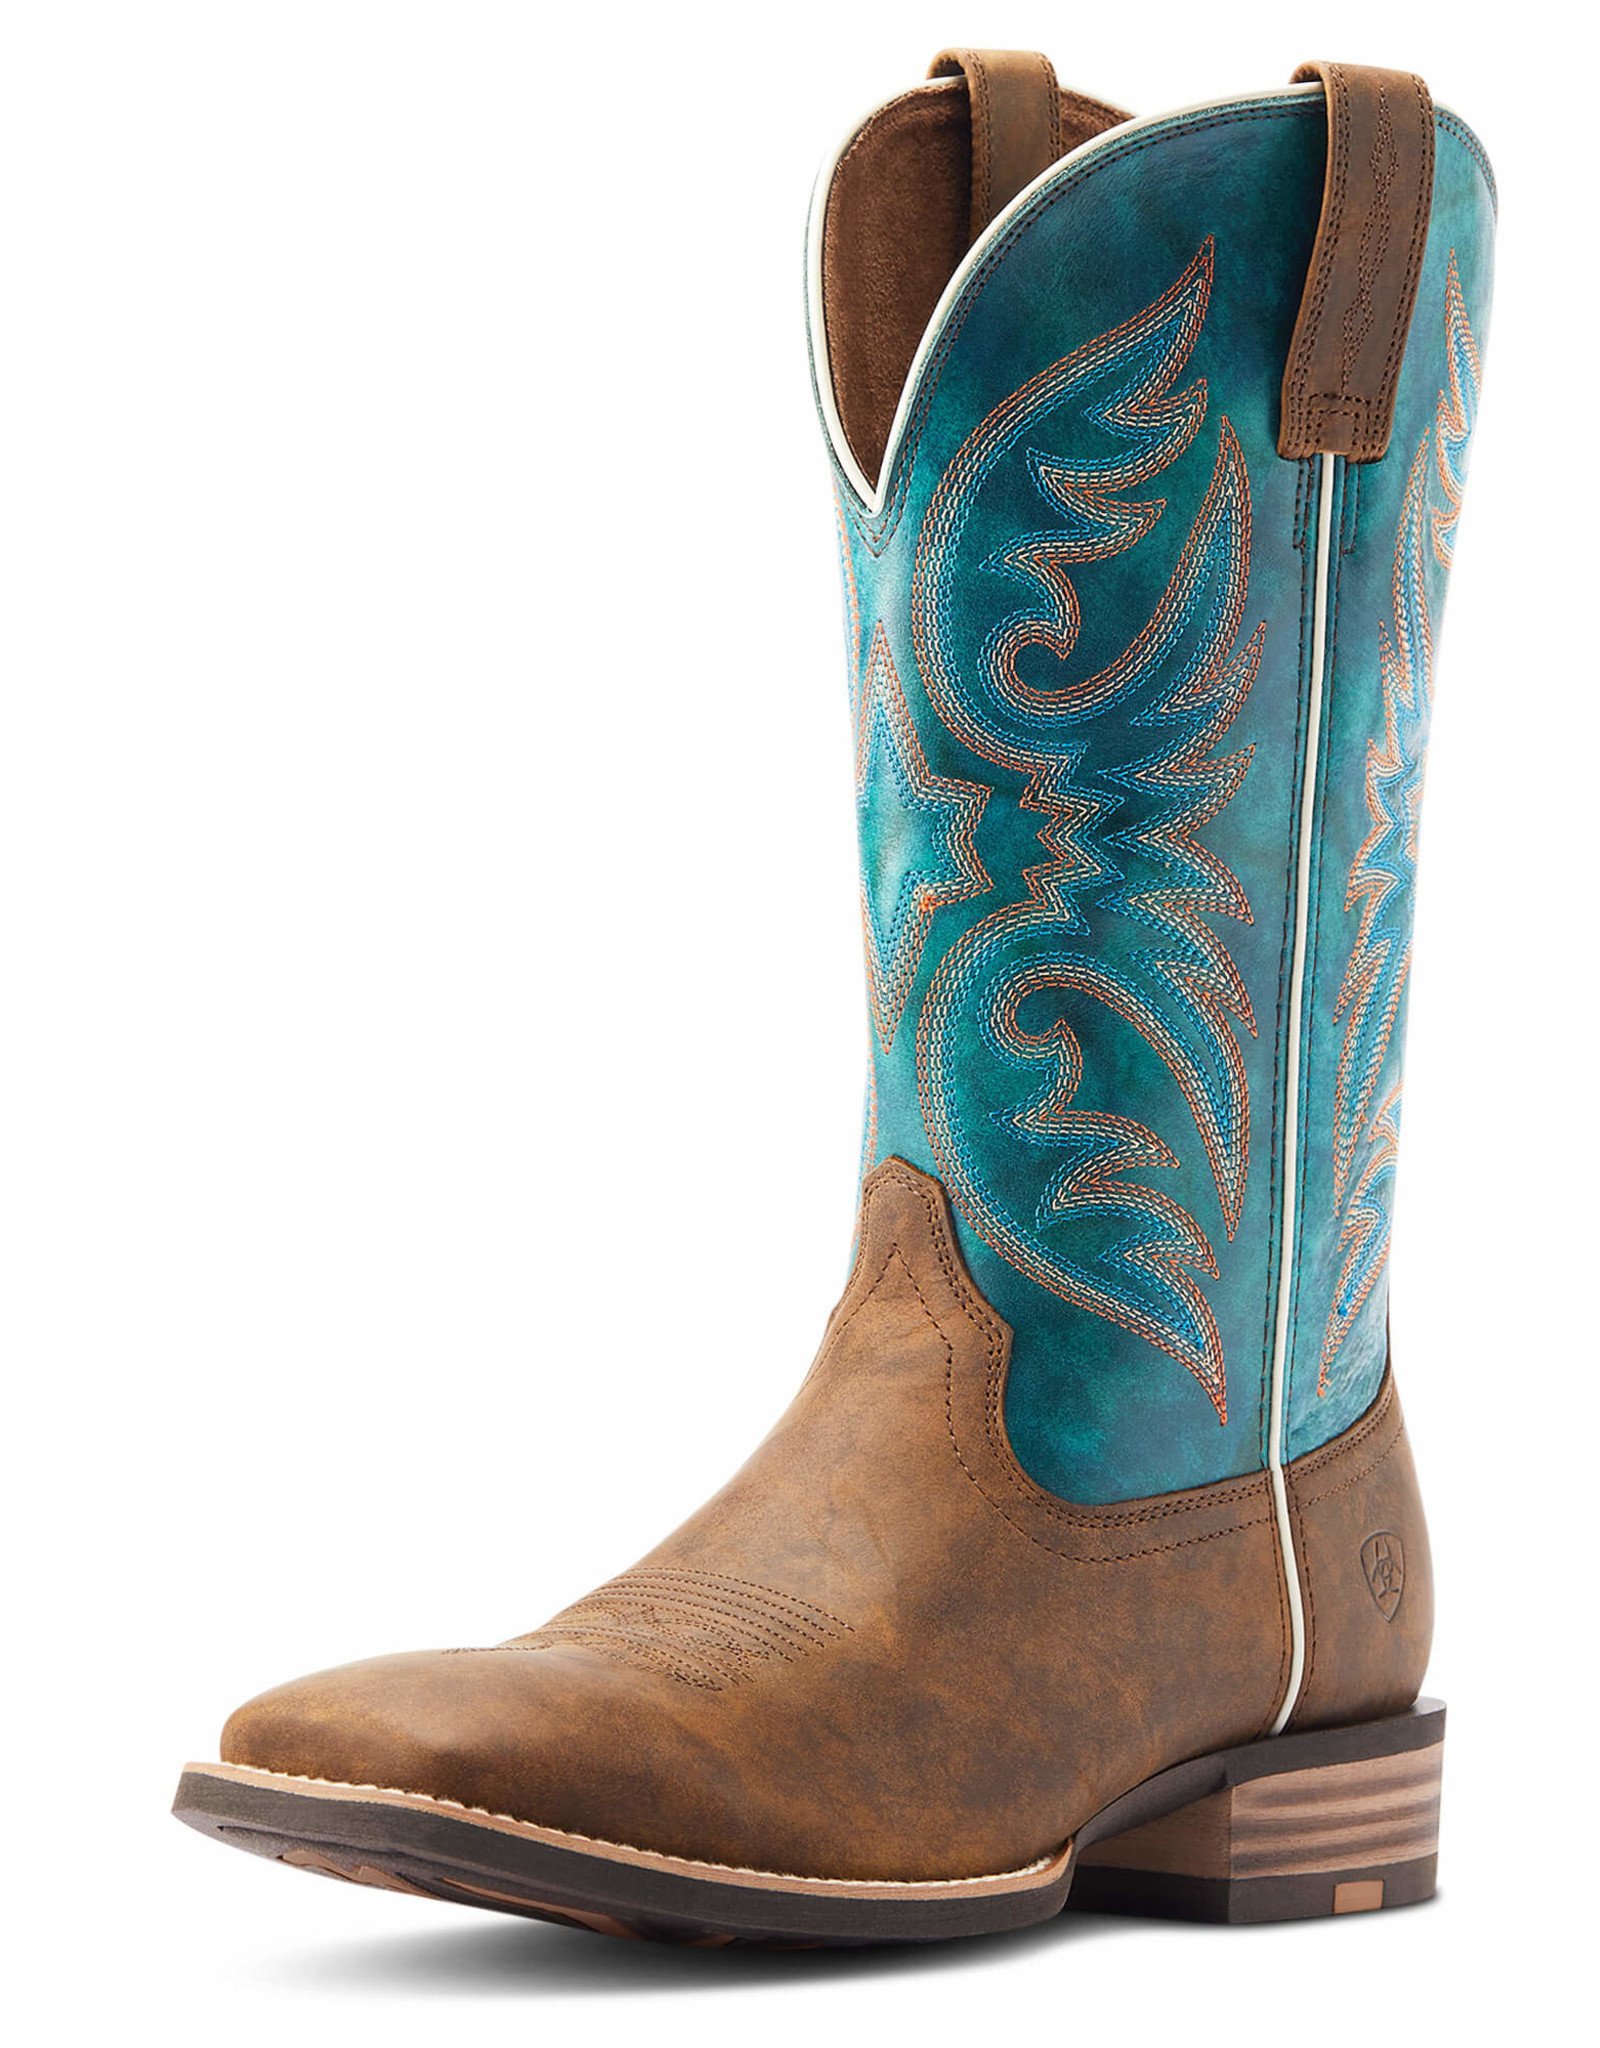 Ariat Mens Ariat Wide Square Toe Brown Teal Ricochet Western Cowboy Boot